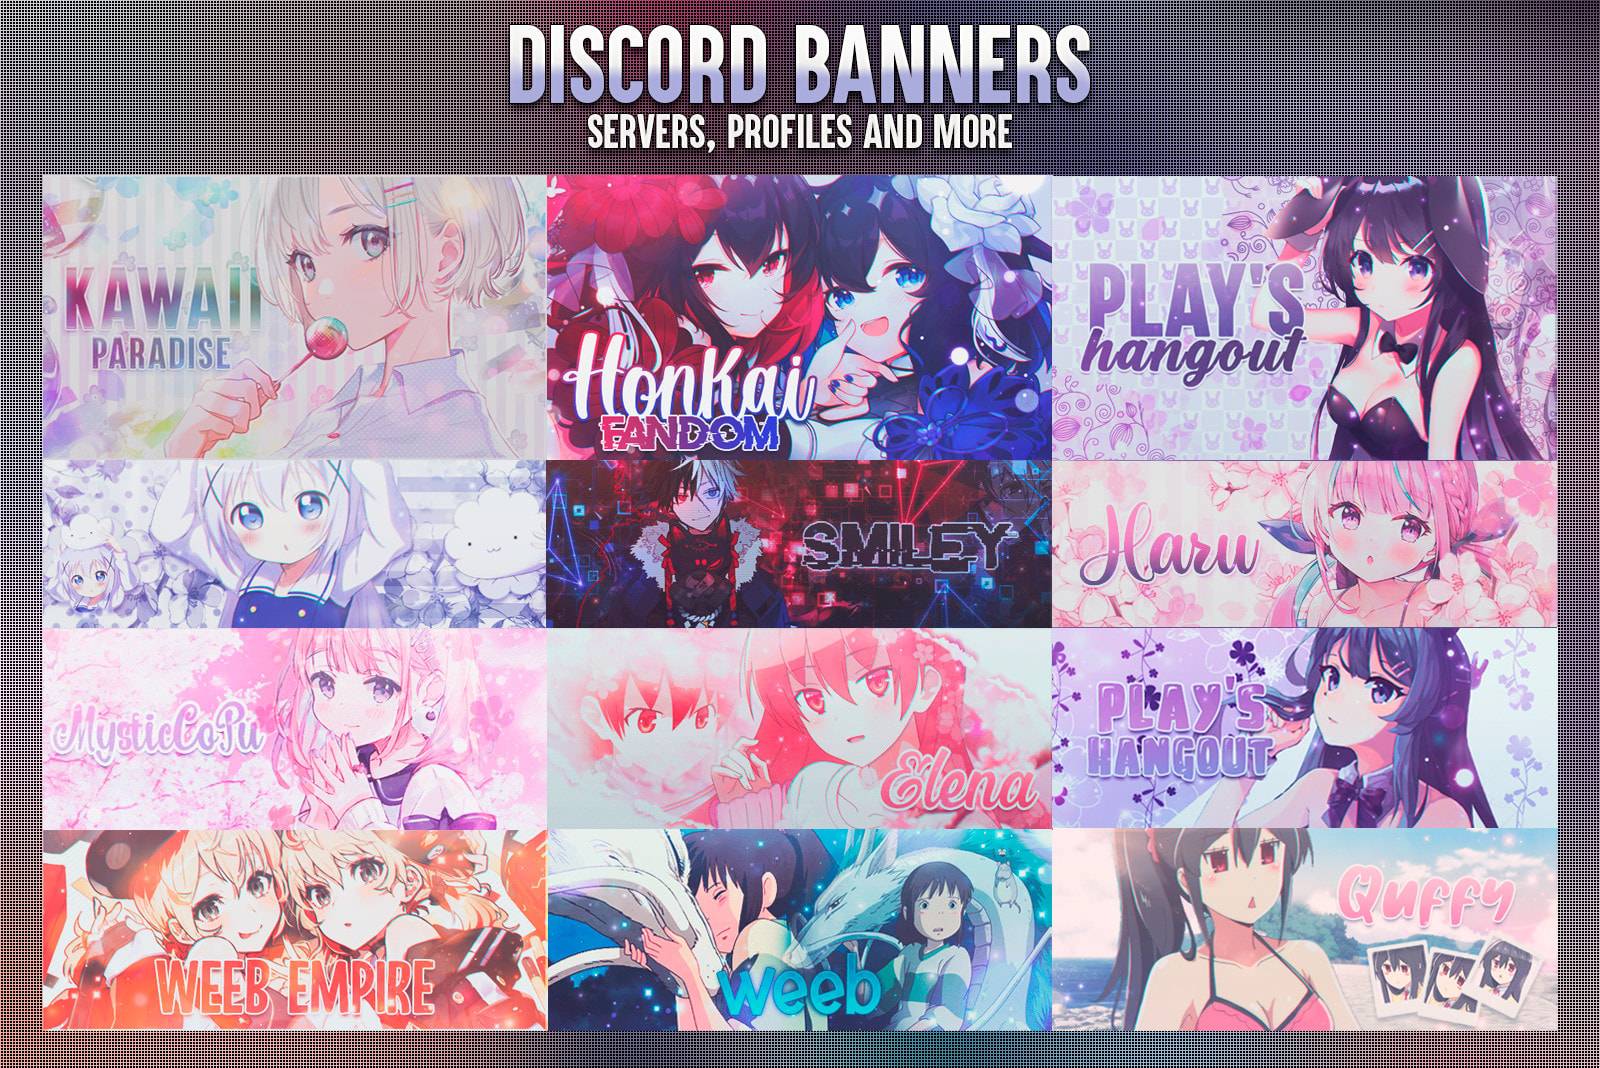 Custom Discord Banners for Your Profile & Server [FREE]